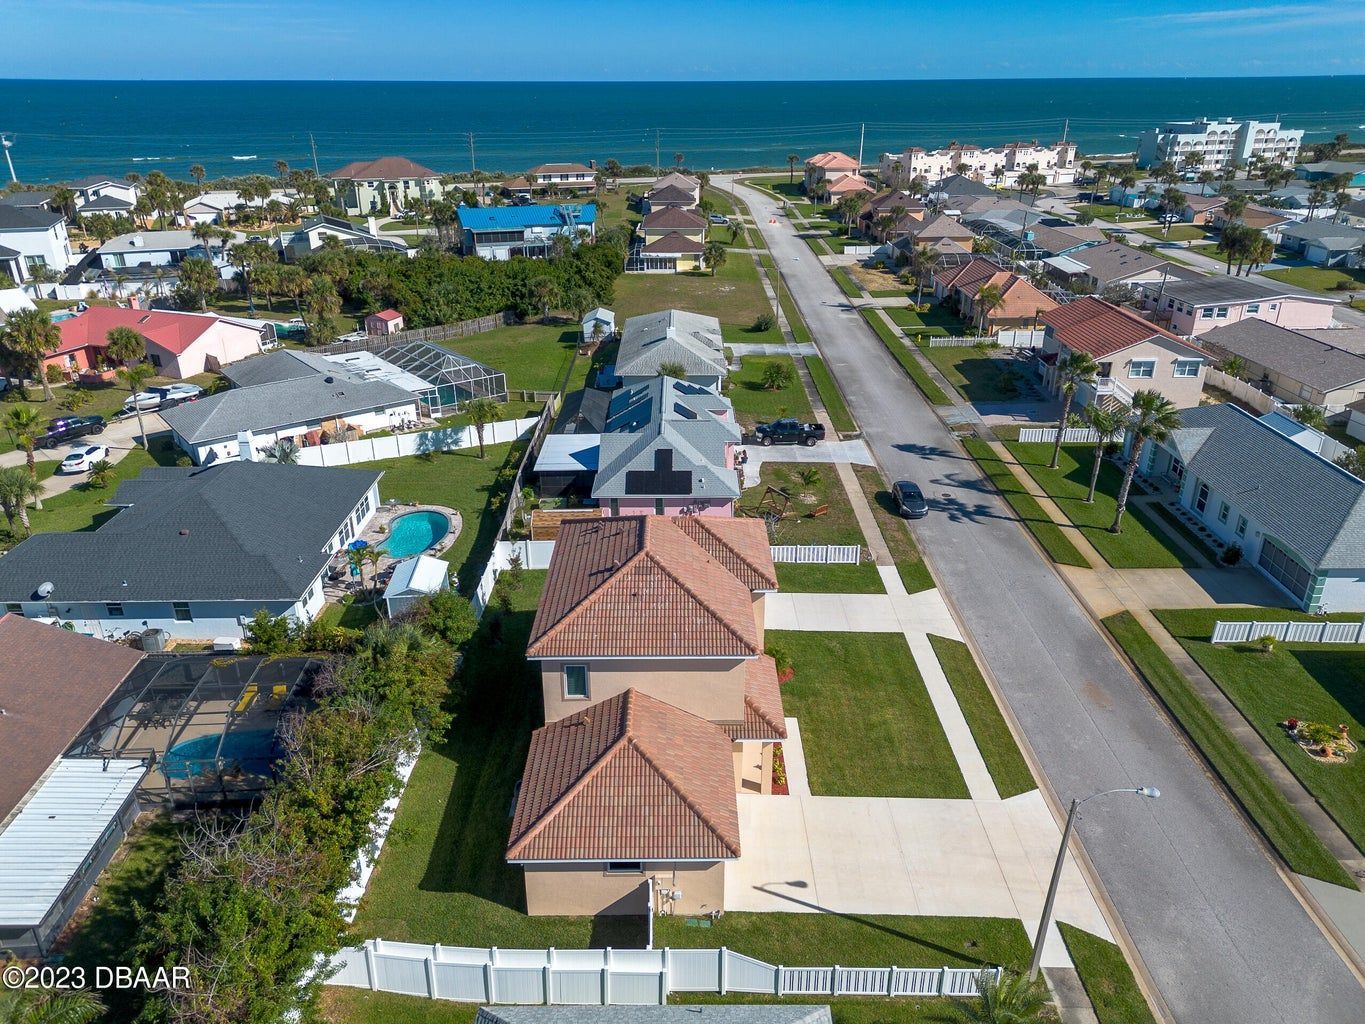 an aerial view of a residential area near the ocean